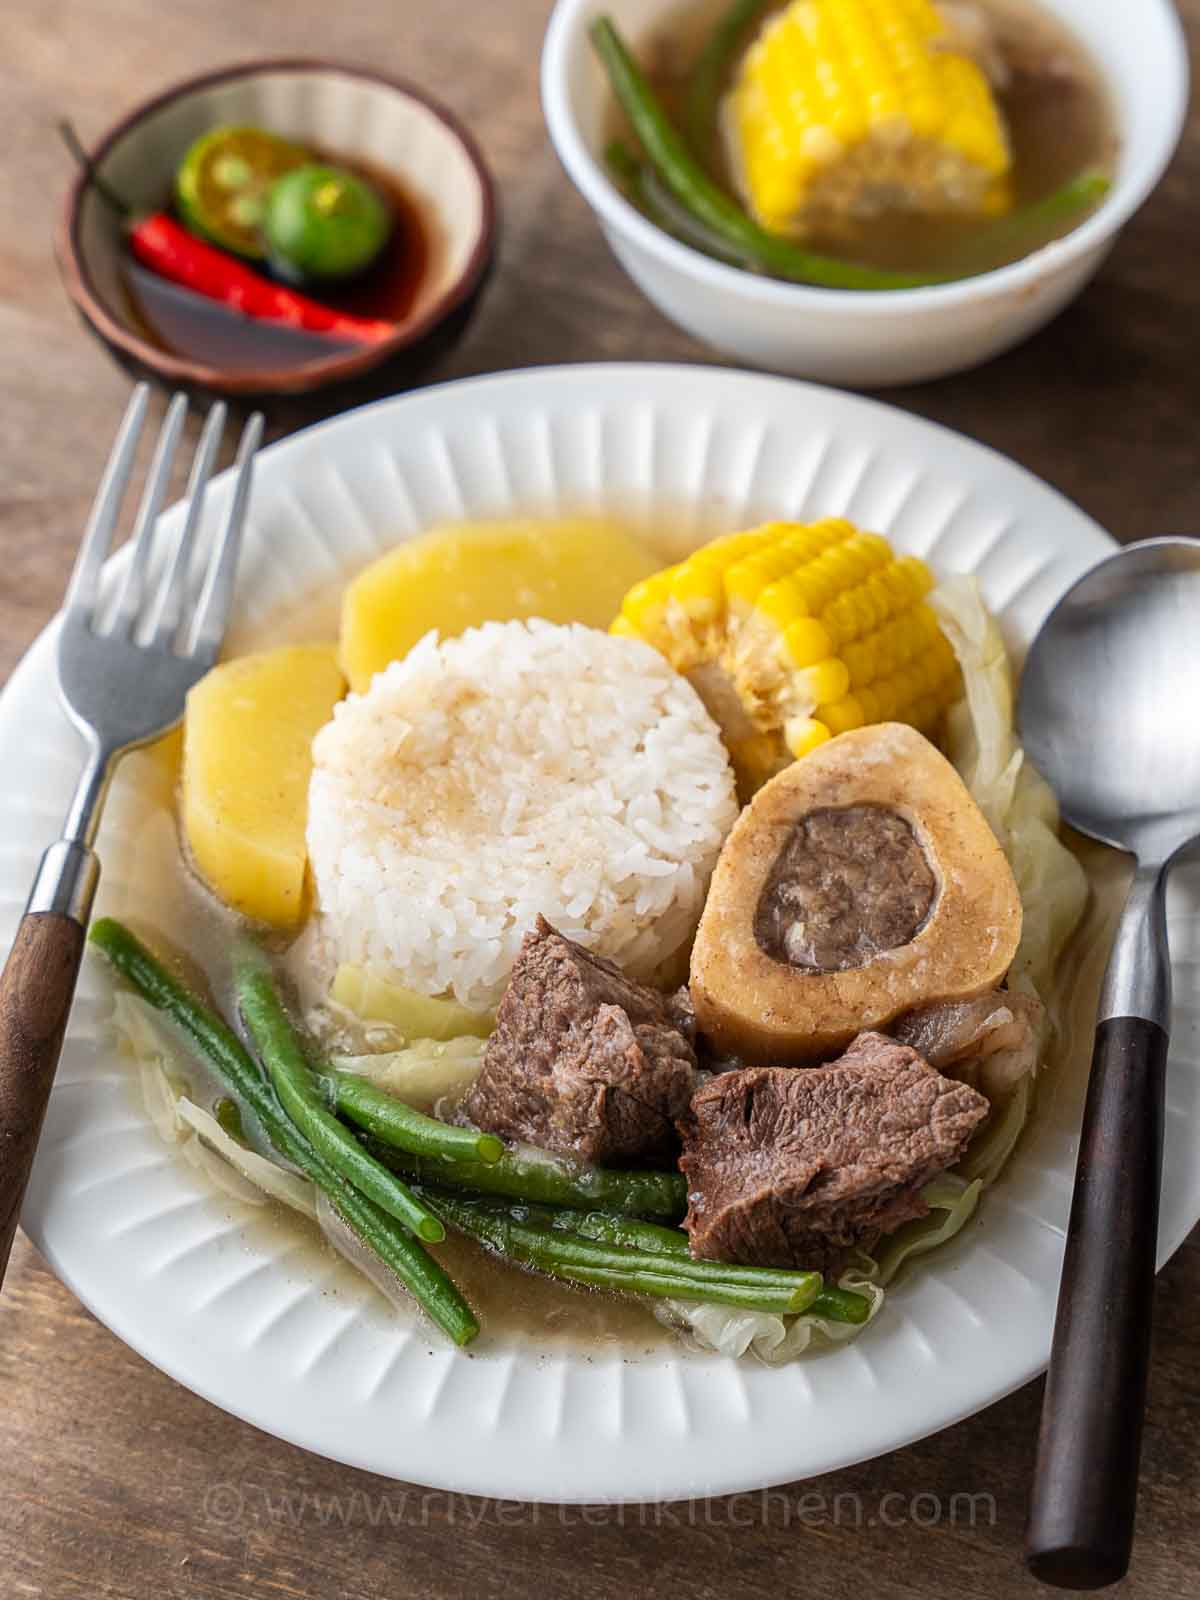 Beef bone soup served with rice and vegetables.